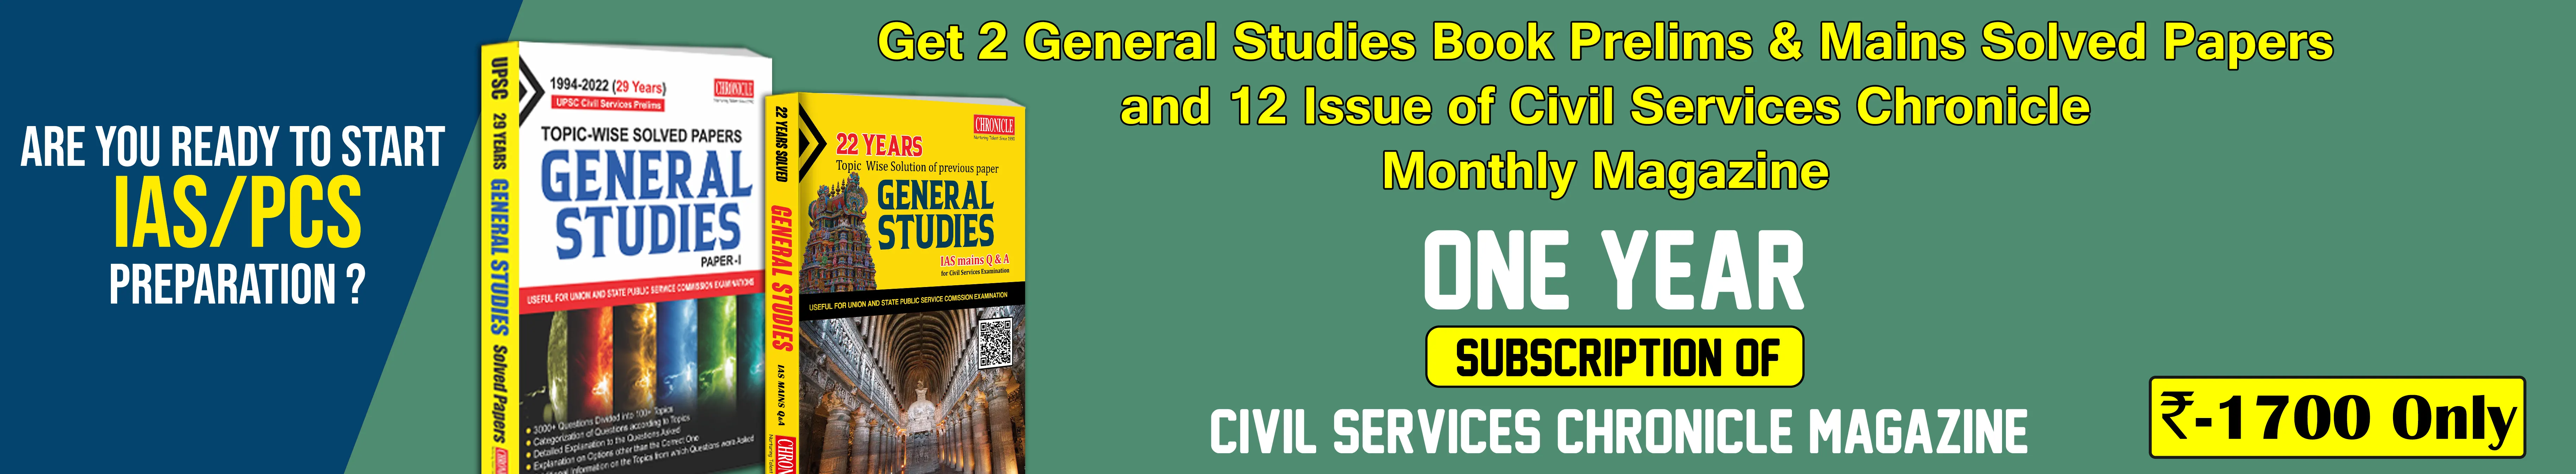 Civil Services Chronicle One Year Subscription With 28 Years UPSC-Civil Services Prelims General Studies 2022 & 22 Years Mains Solve Papers 2022